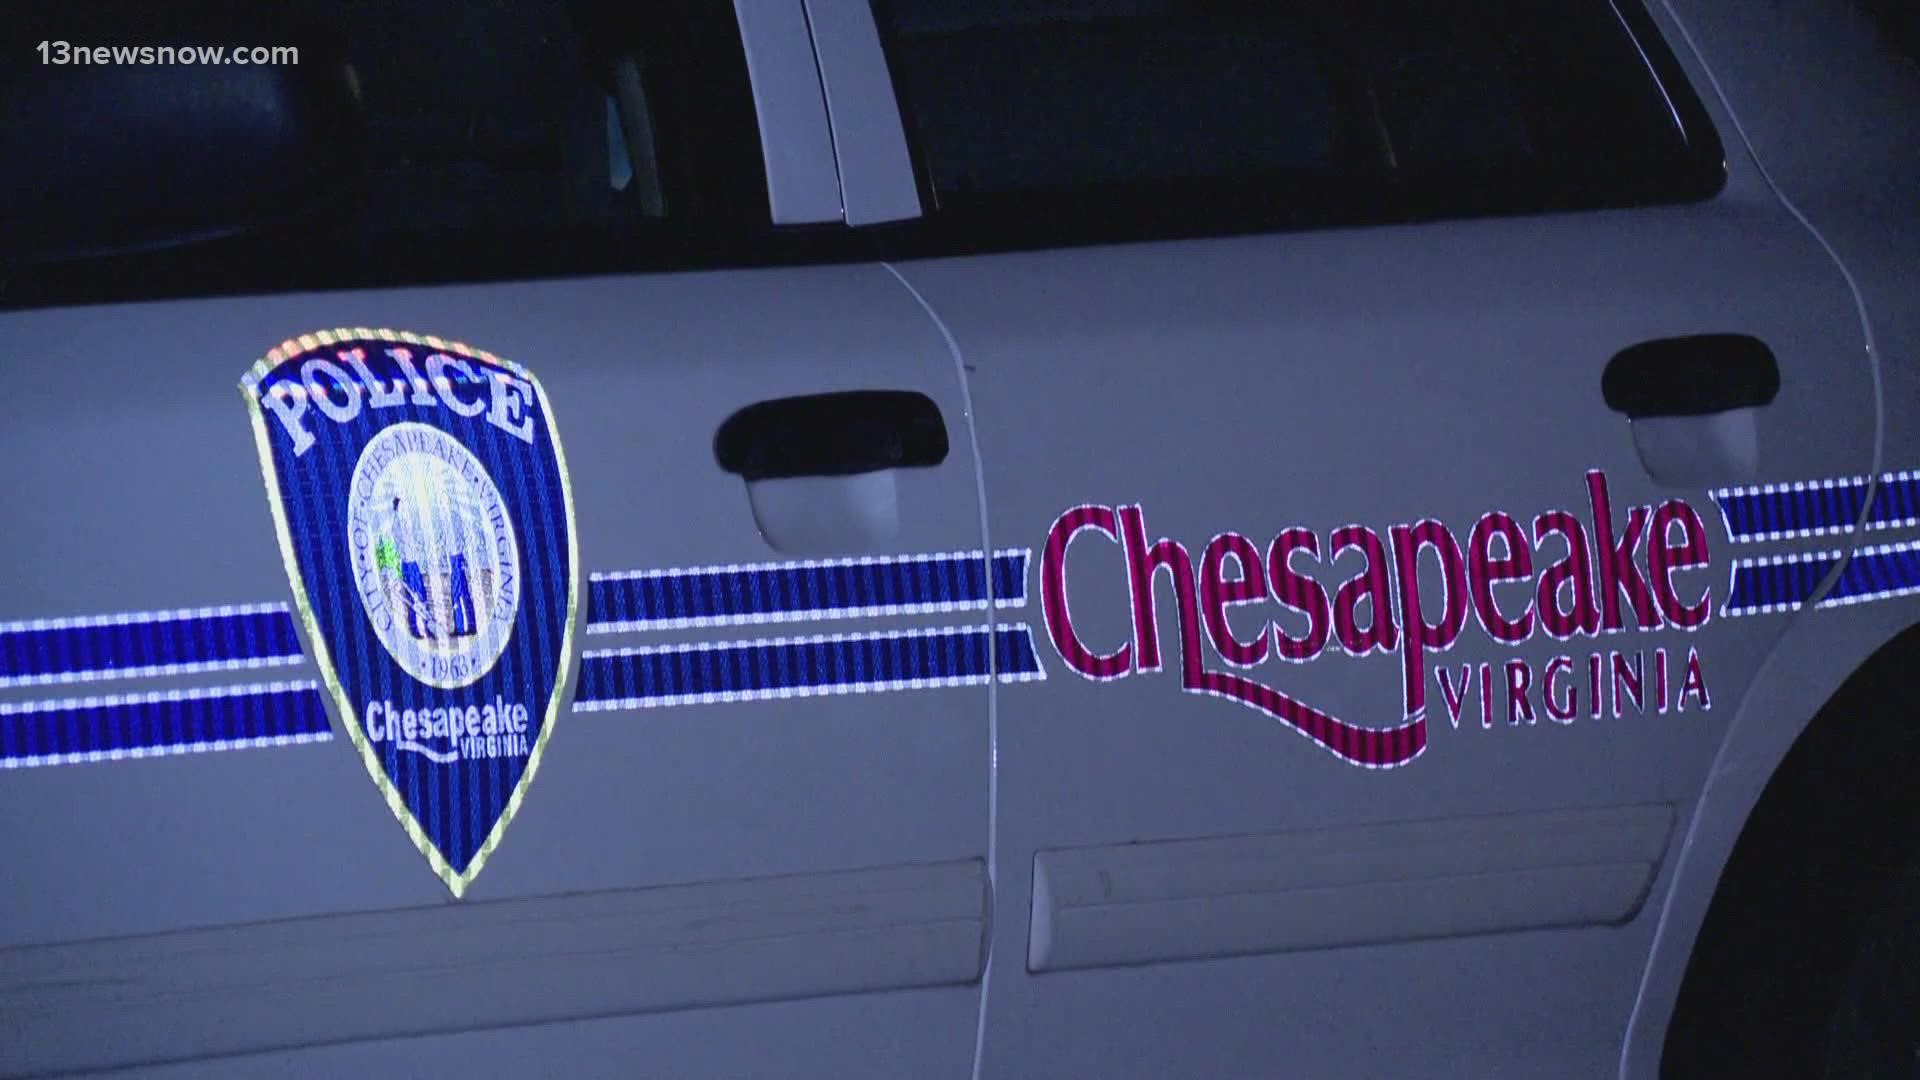 CPD said officers found a man in the backseat of the car, dead from a gunshot wound. He was later identified as 18-year-old Stanford Sharpe of Chesapeake.